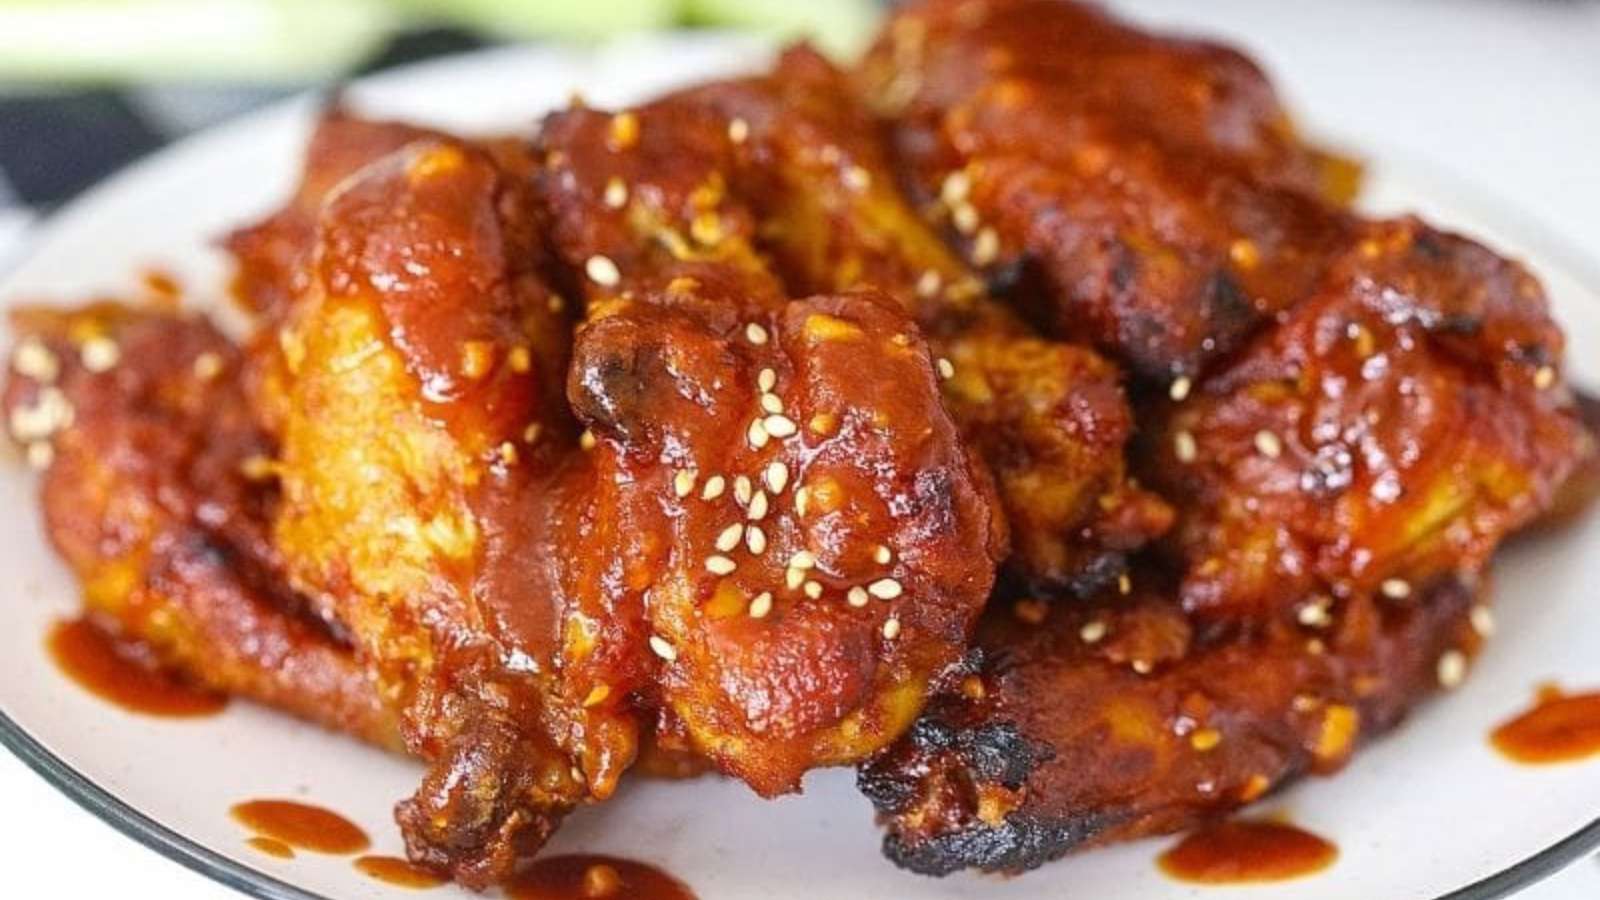 A plate of chicken wings.